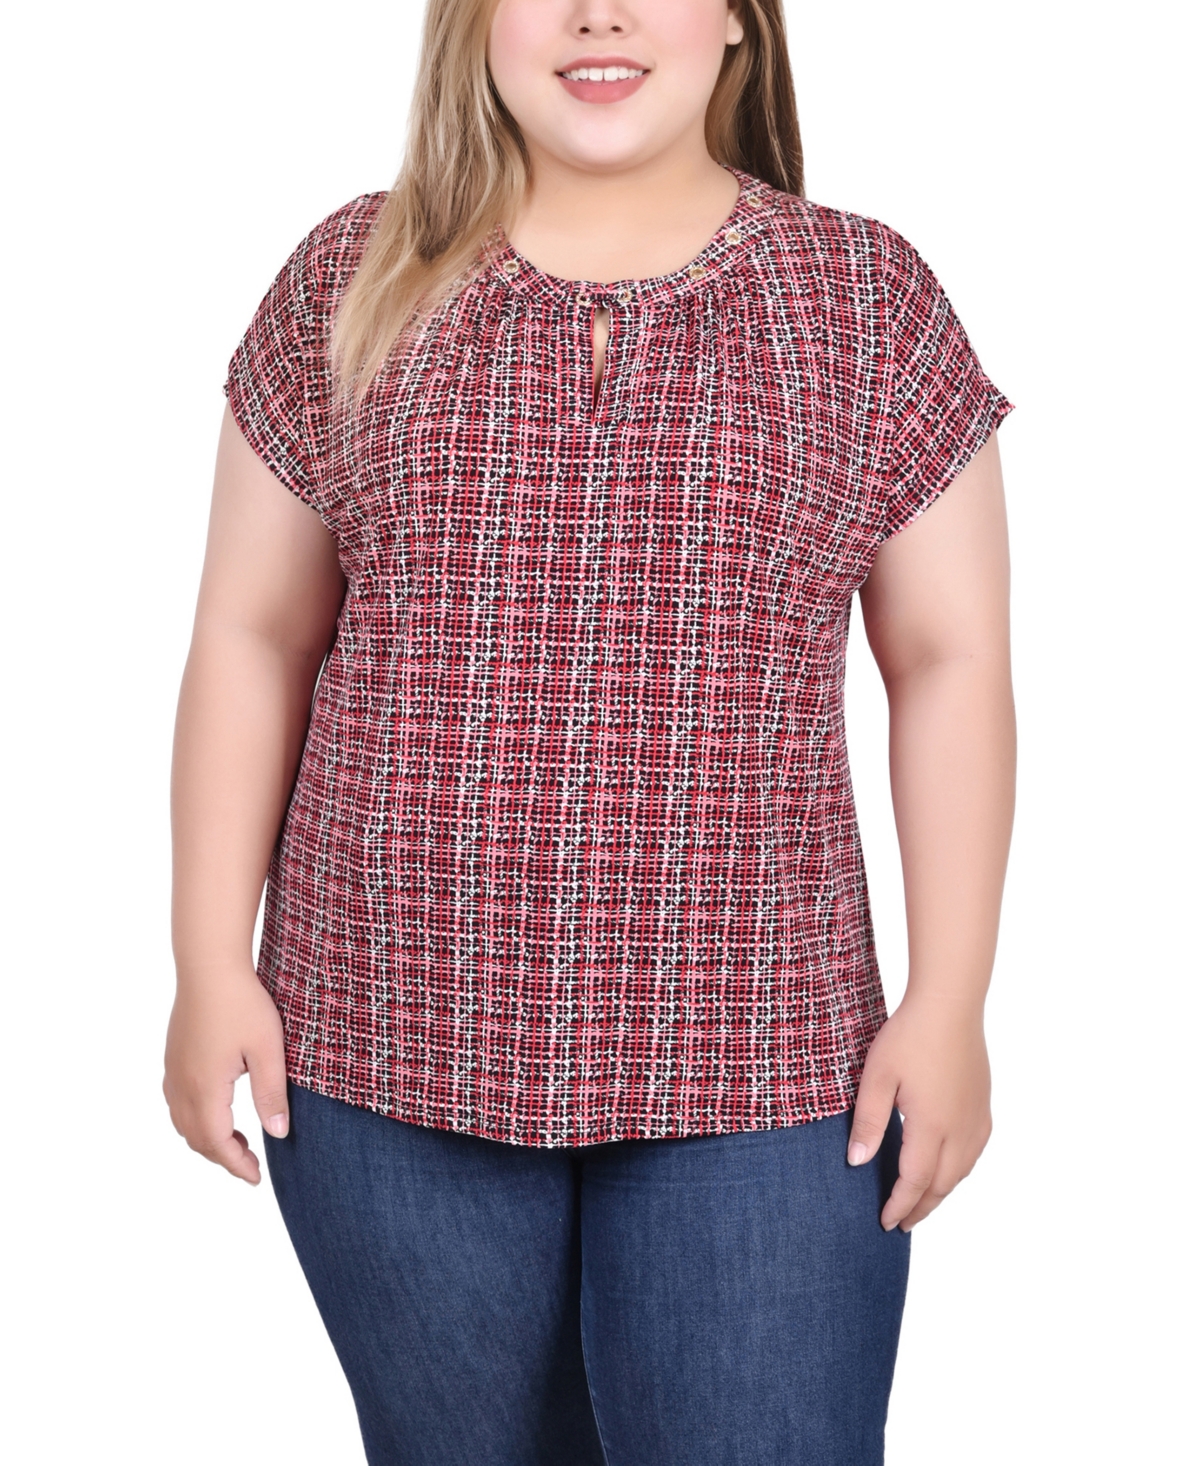 NY COLLECTION PLUS SIZE EXTENDED SLEEVE TOP WITH GROMMETS